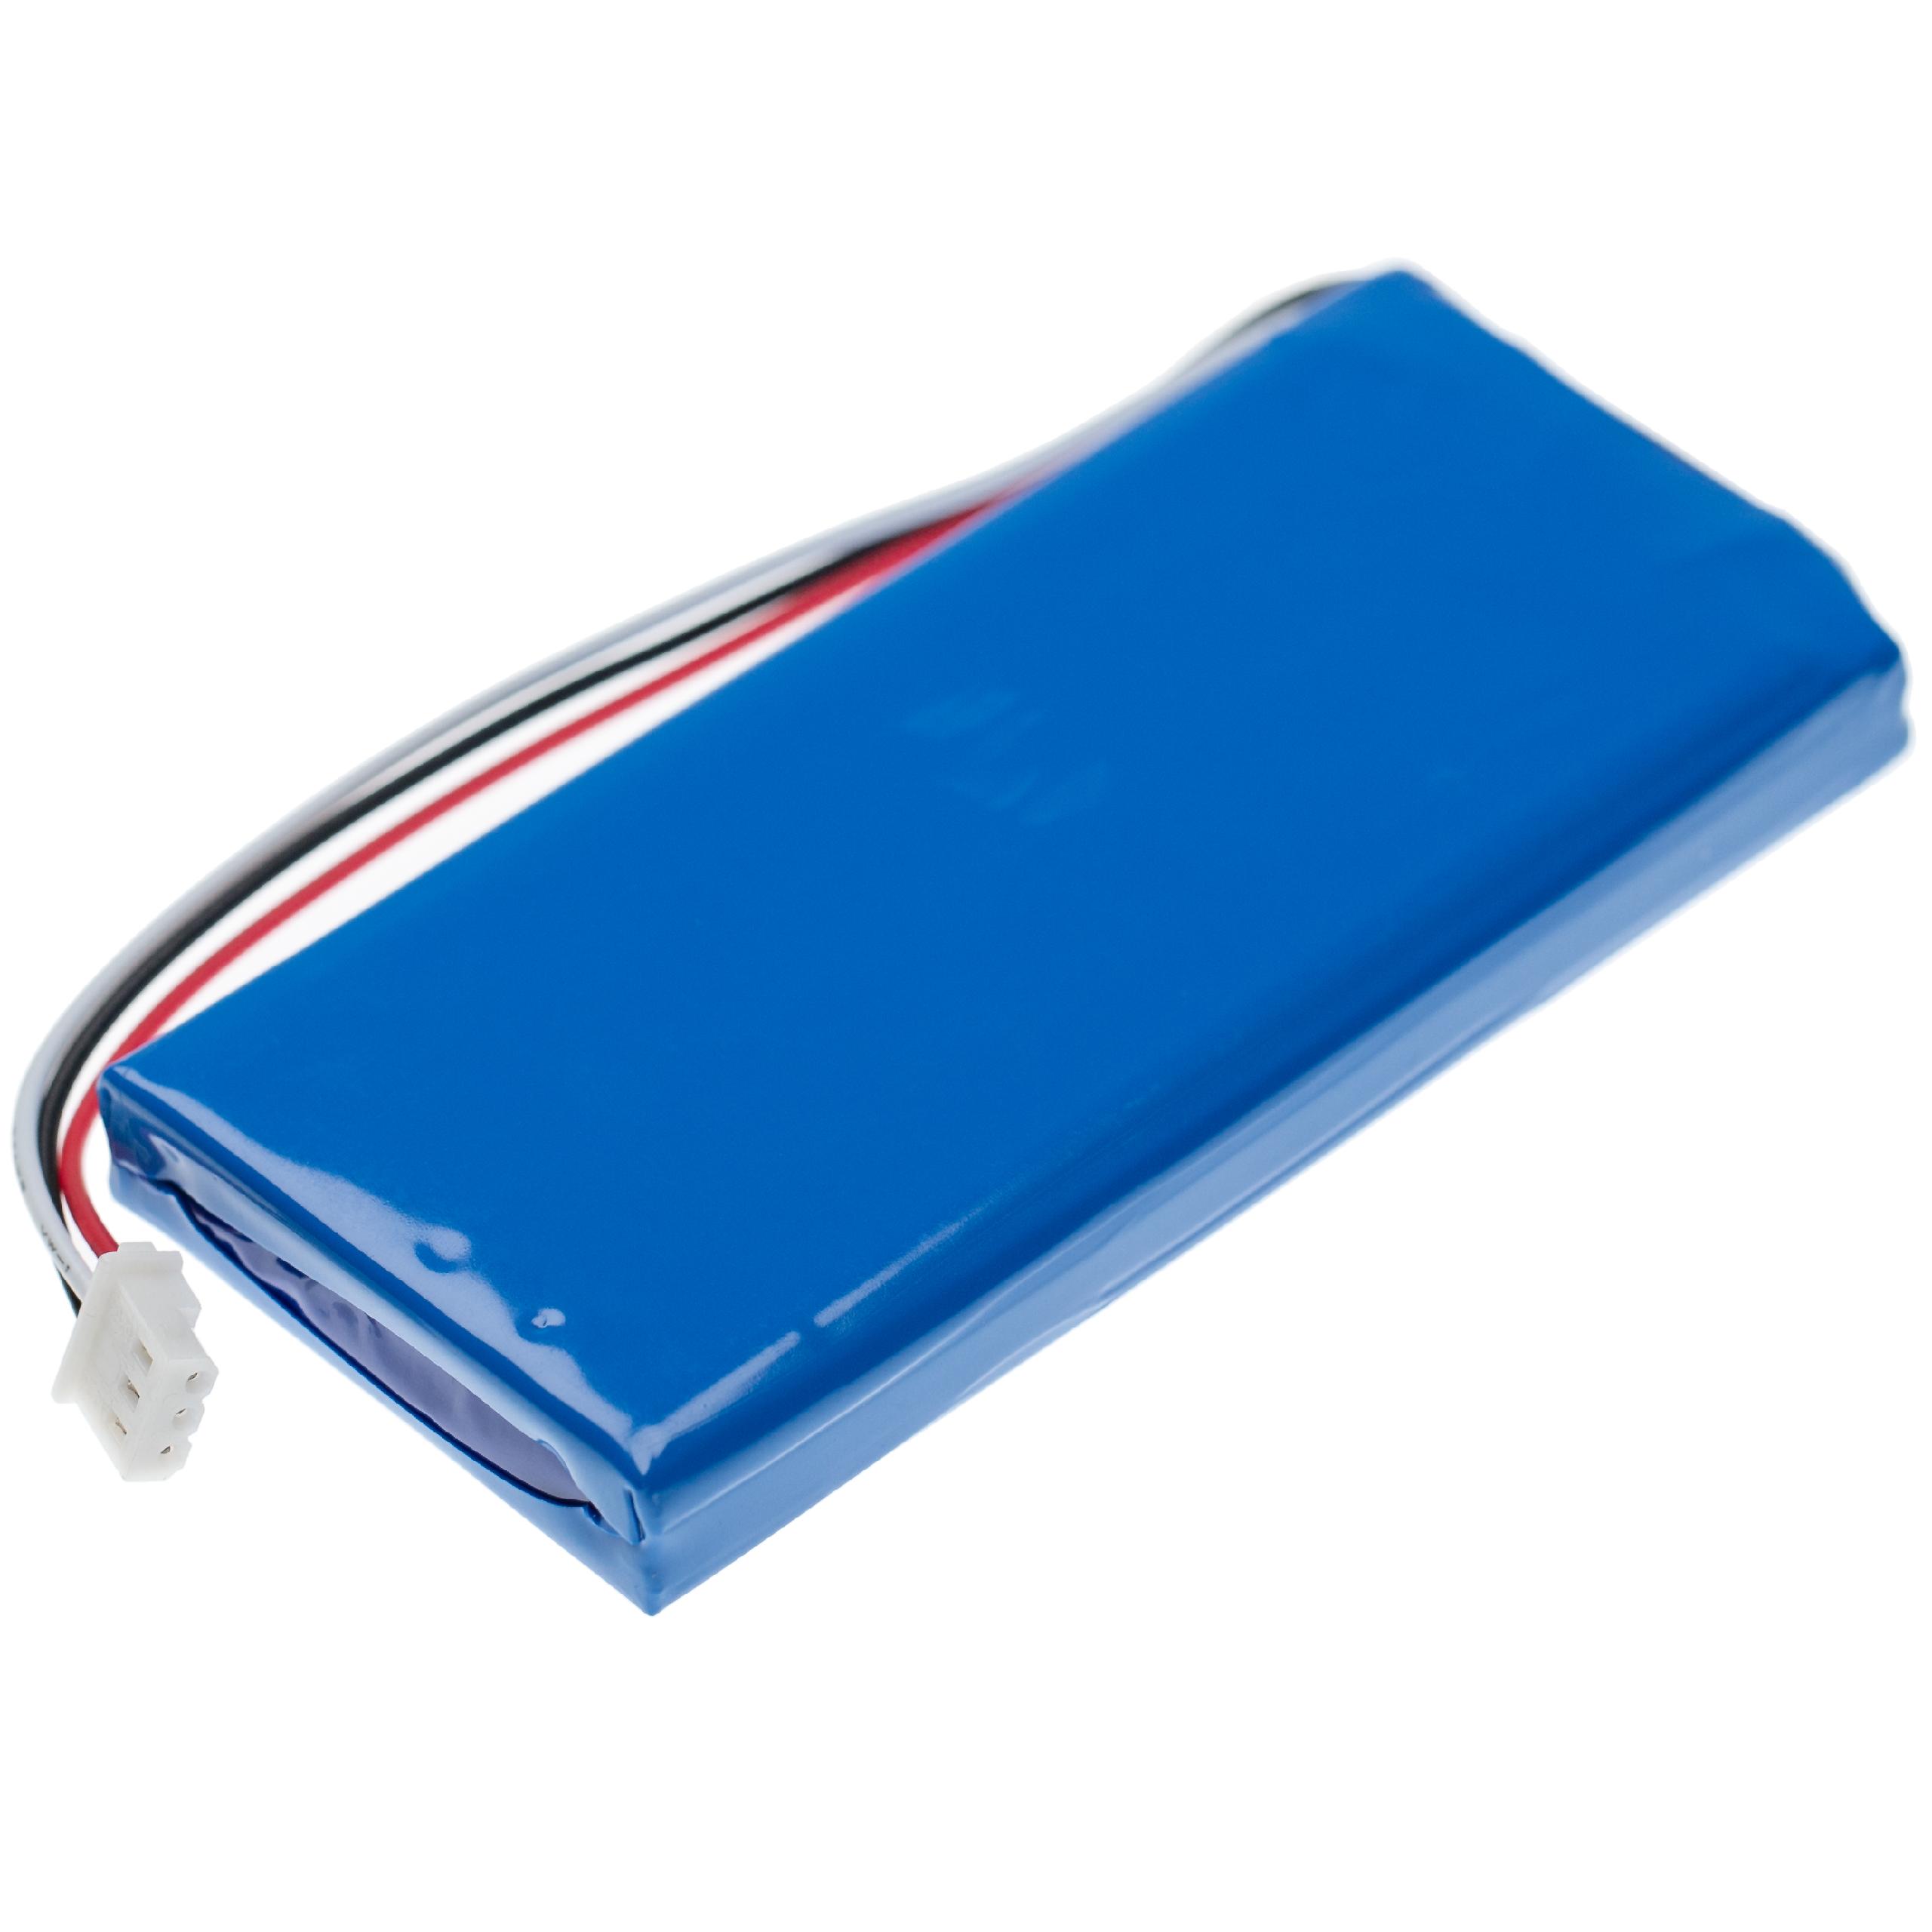 Laser Battery Replacement for Aaronia E-0205, ACE604396 2S1P - 3000mAh 7.4V Li-polymer